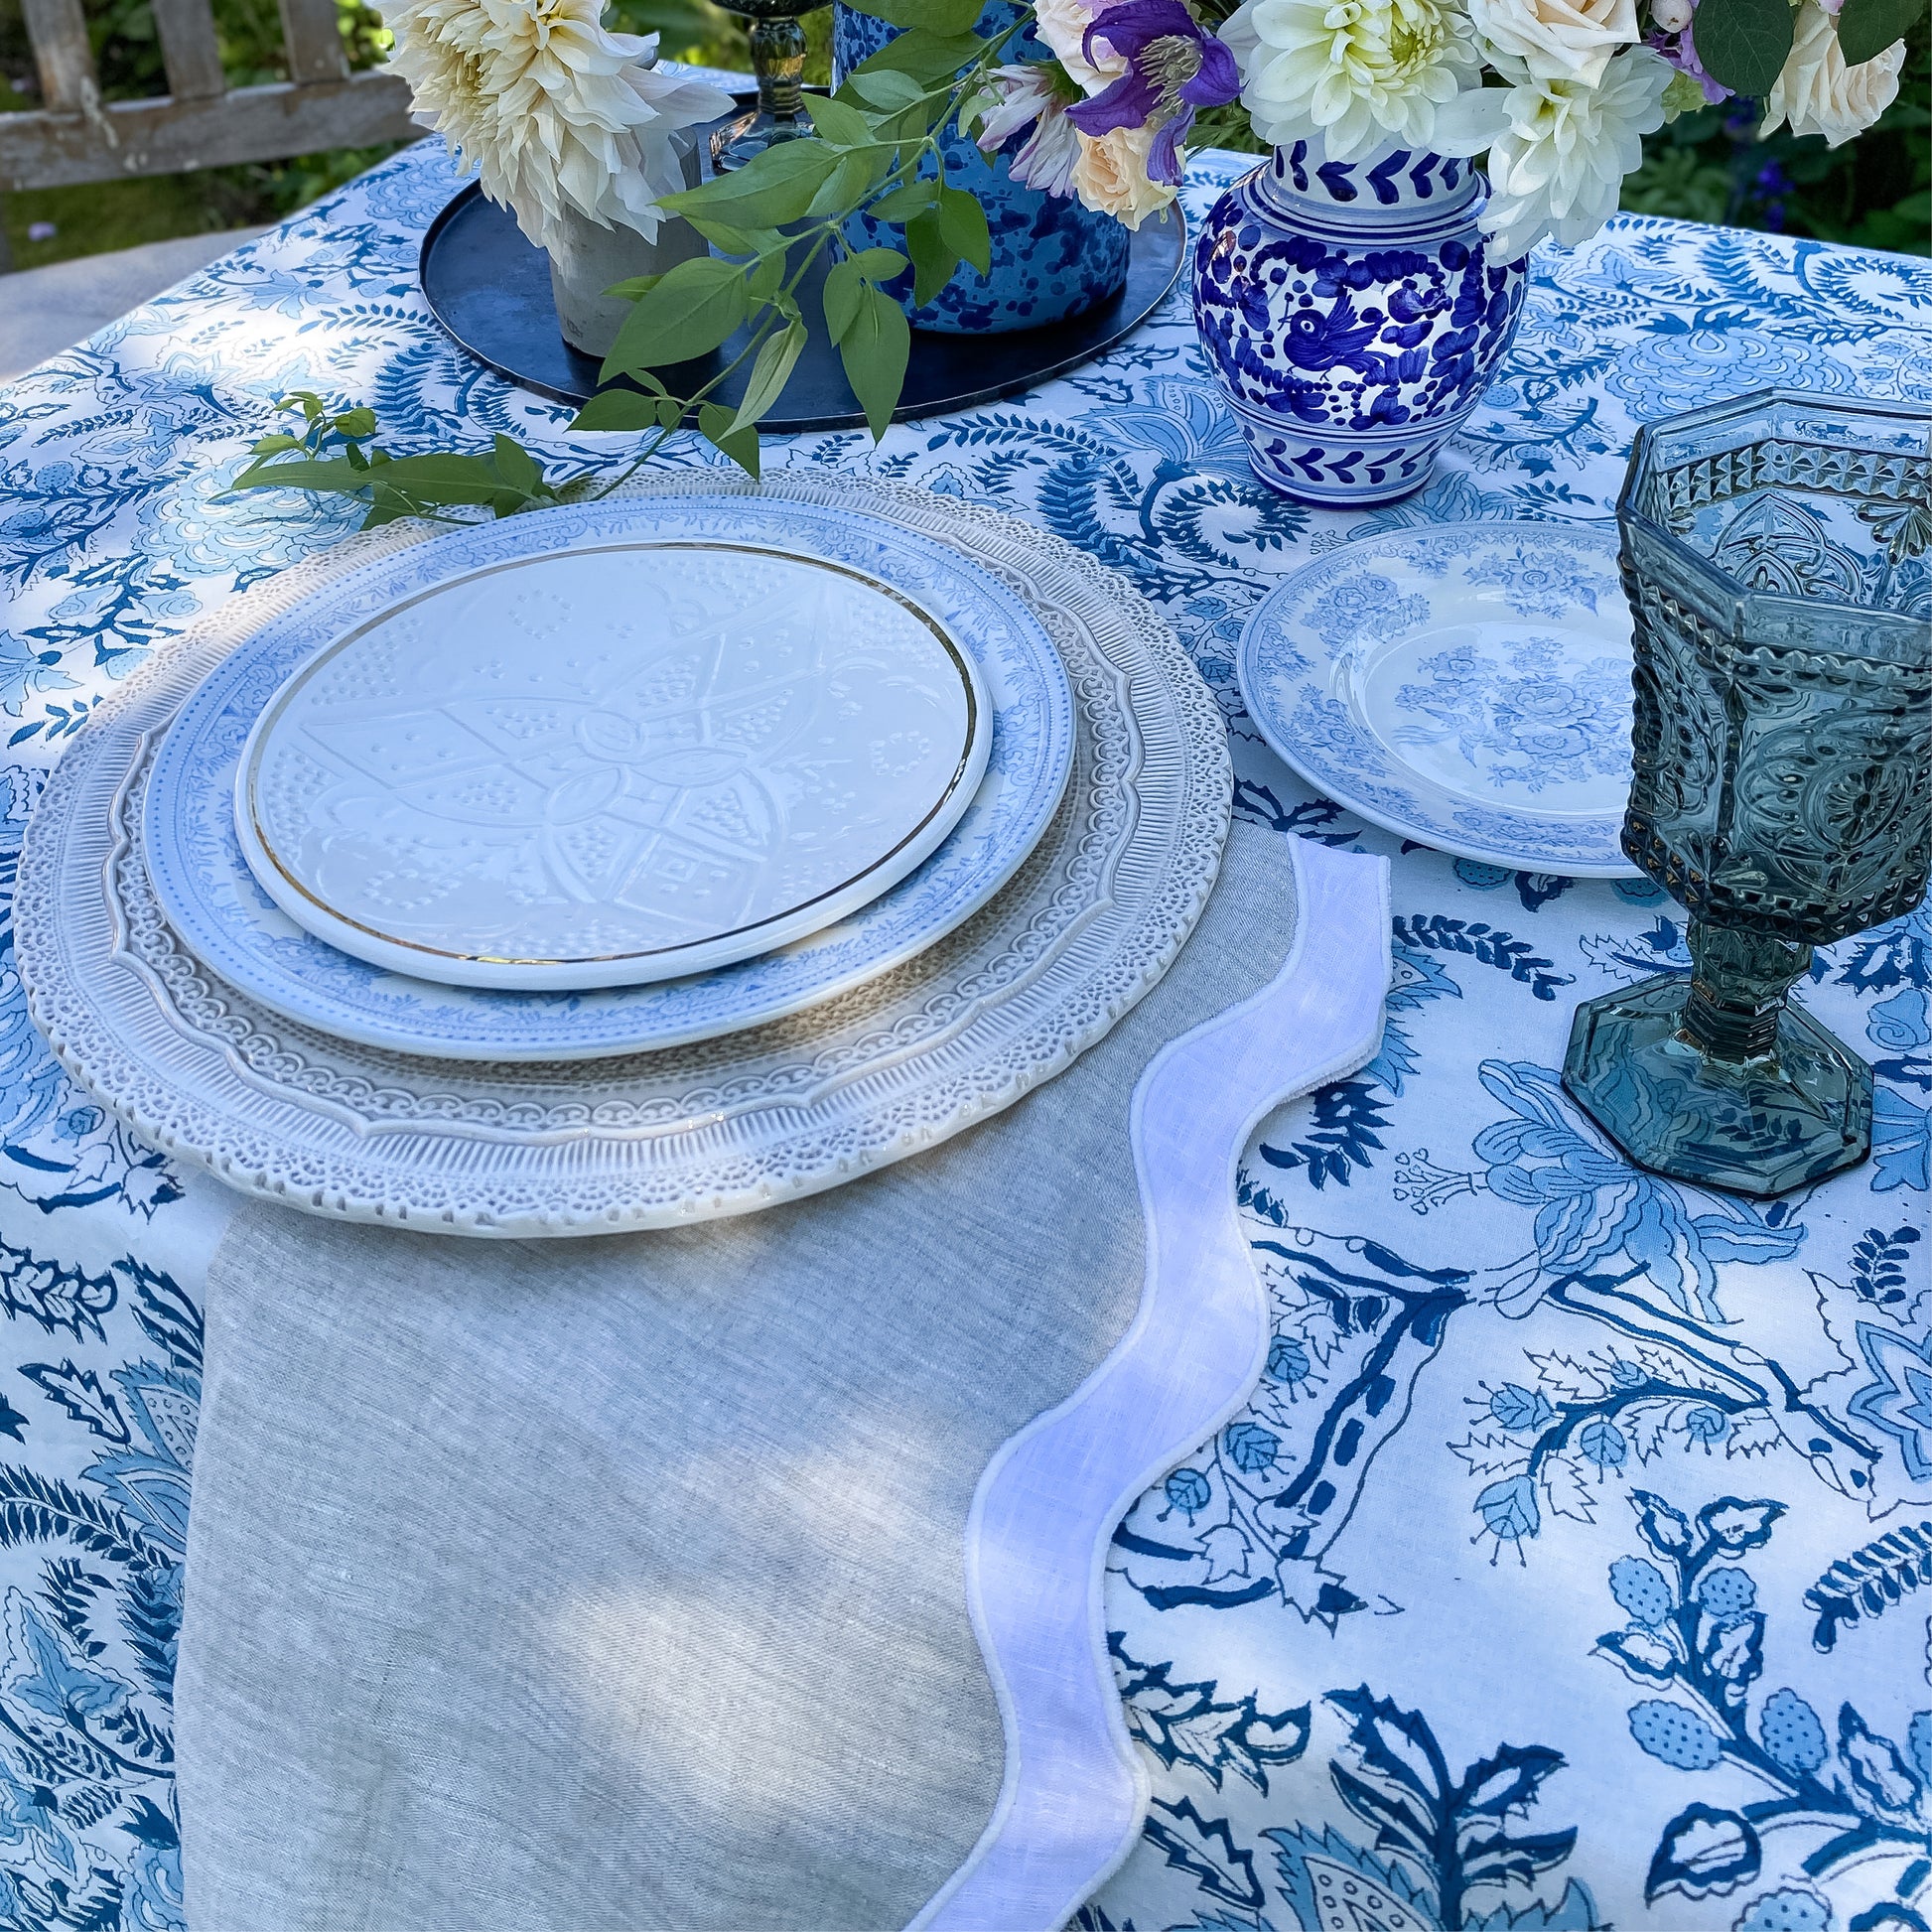 Blue and white block printed tablecloth